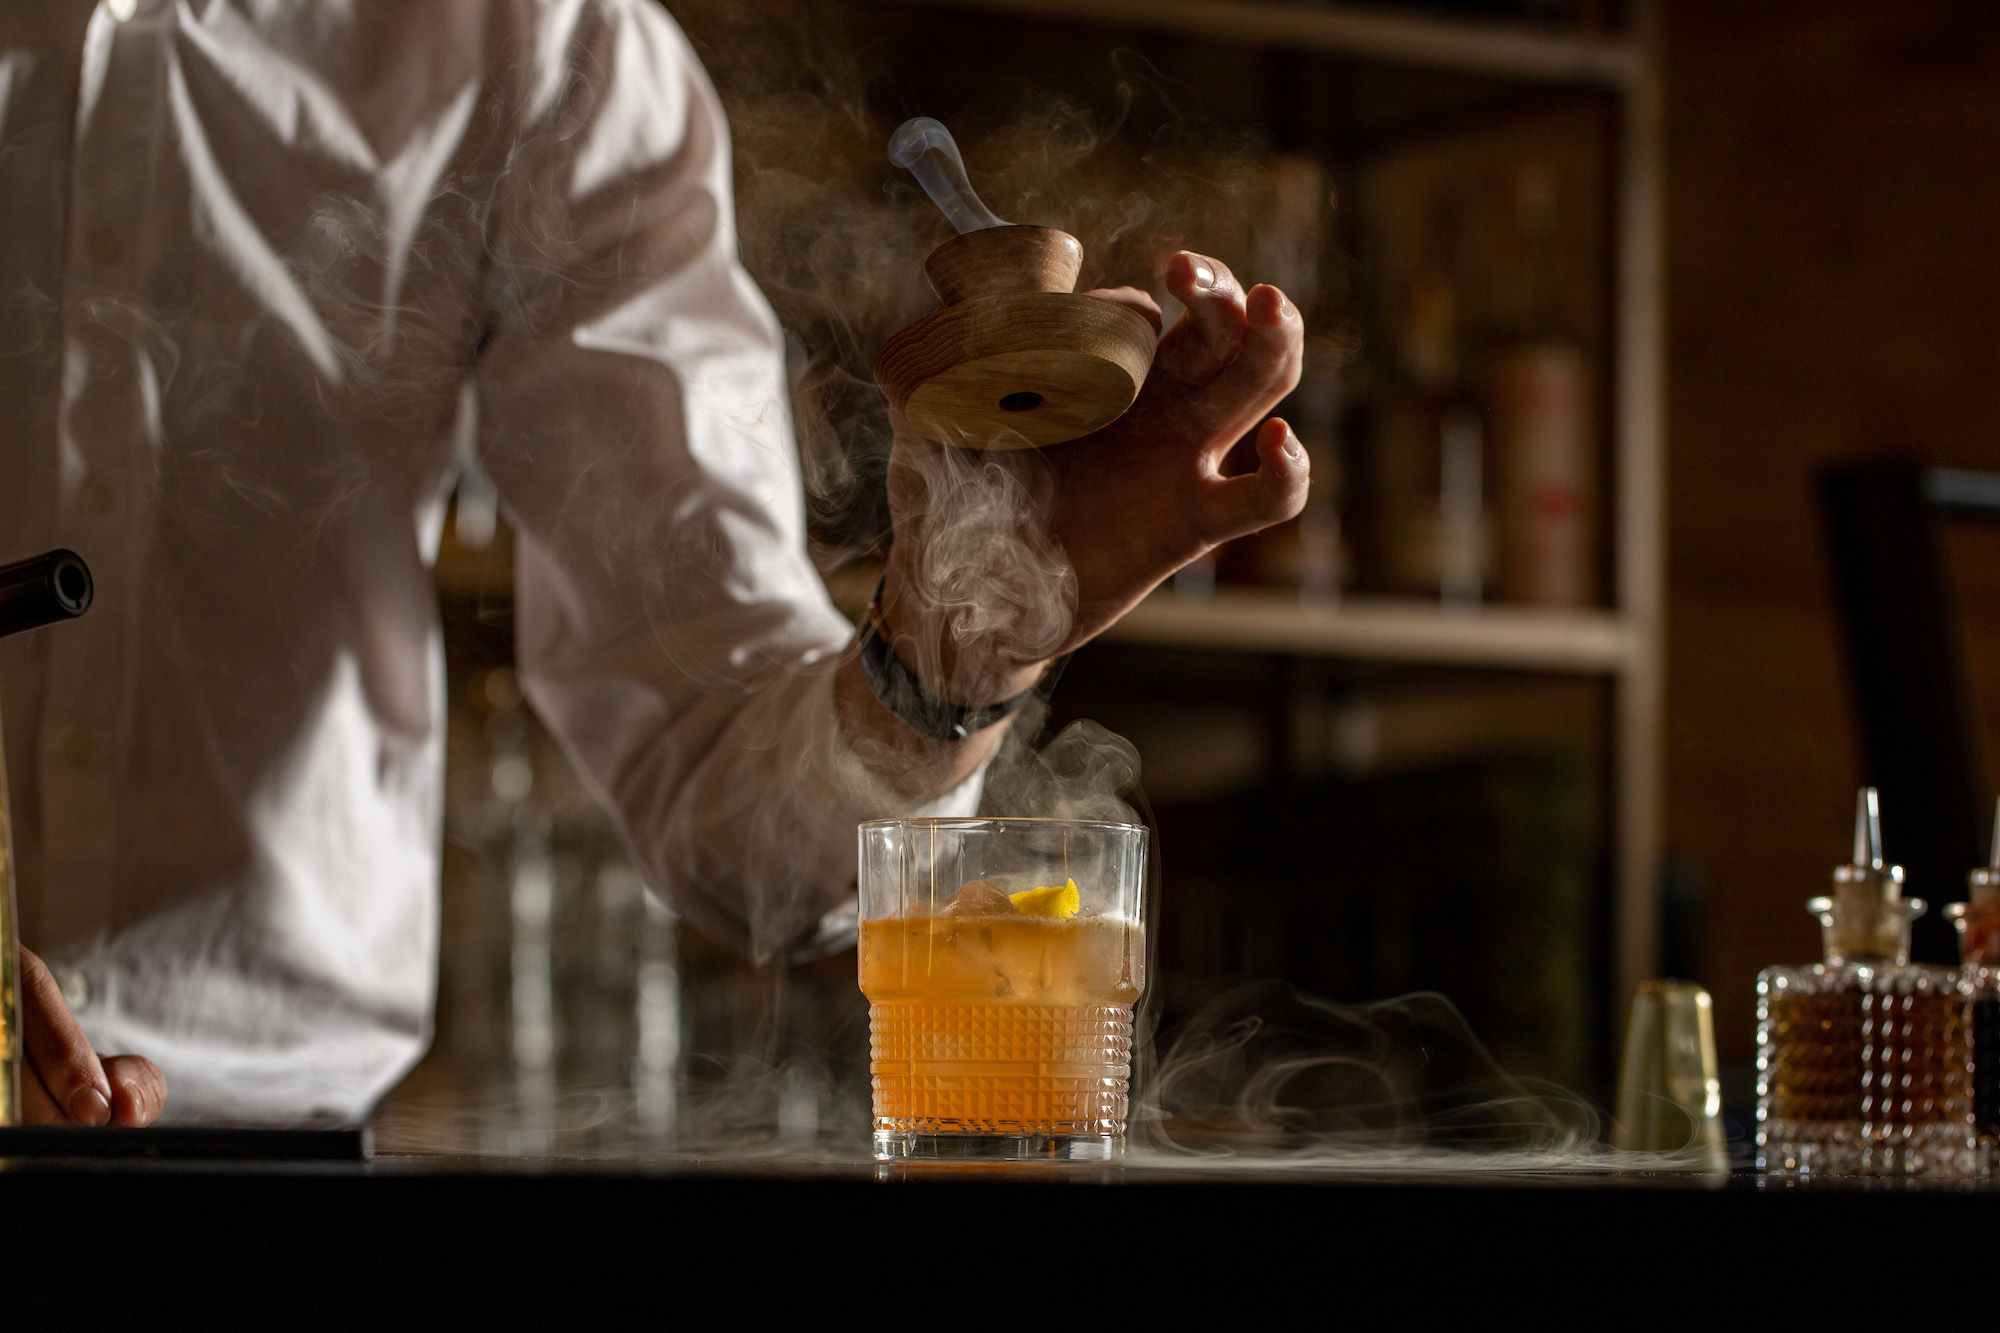 A hand lifts a wooden stopper from on top of a cocktail glass at a dim bar.